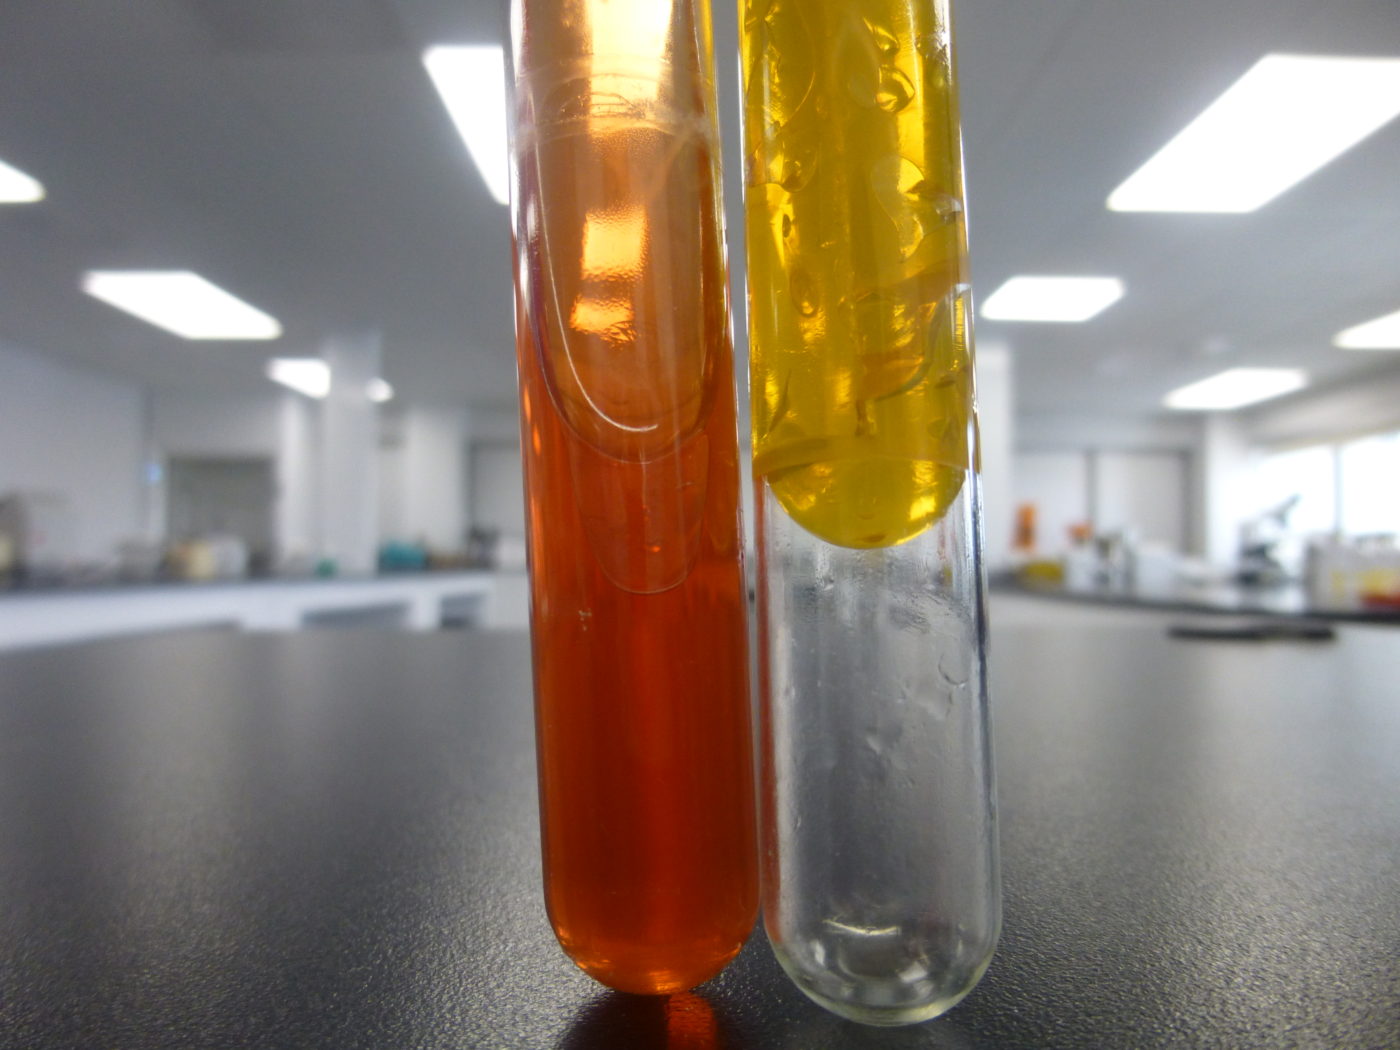 test tubes show variation in colour plus presence of gases